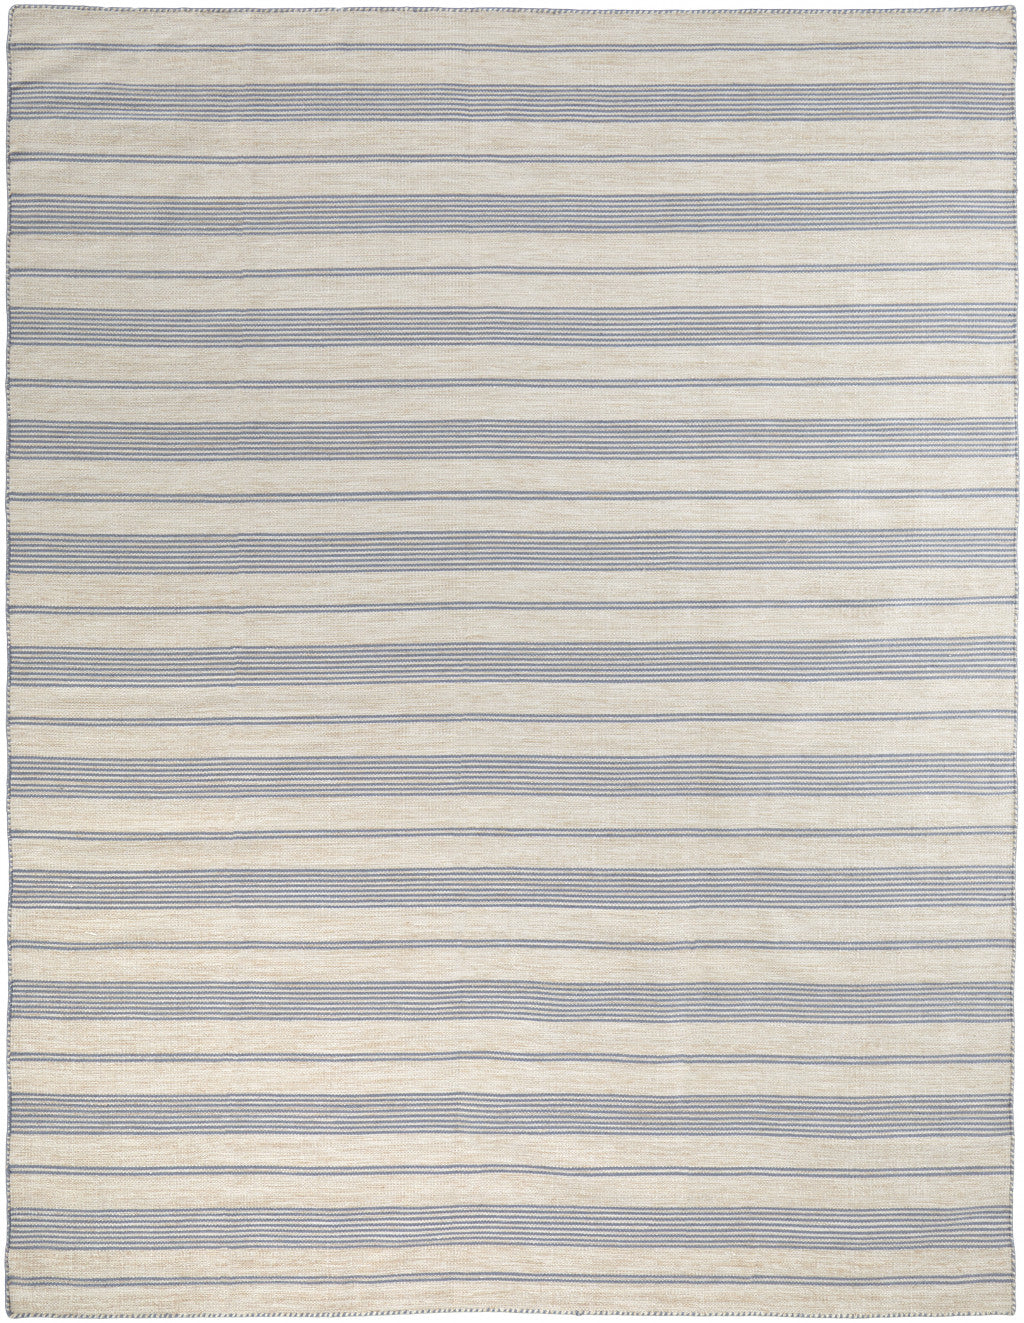 10' X 14' Blue Ivory And Tan Striped Dhurrie Hand Woven Stain Resistant Area Rug